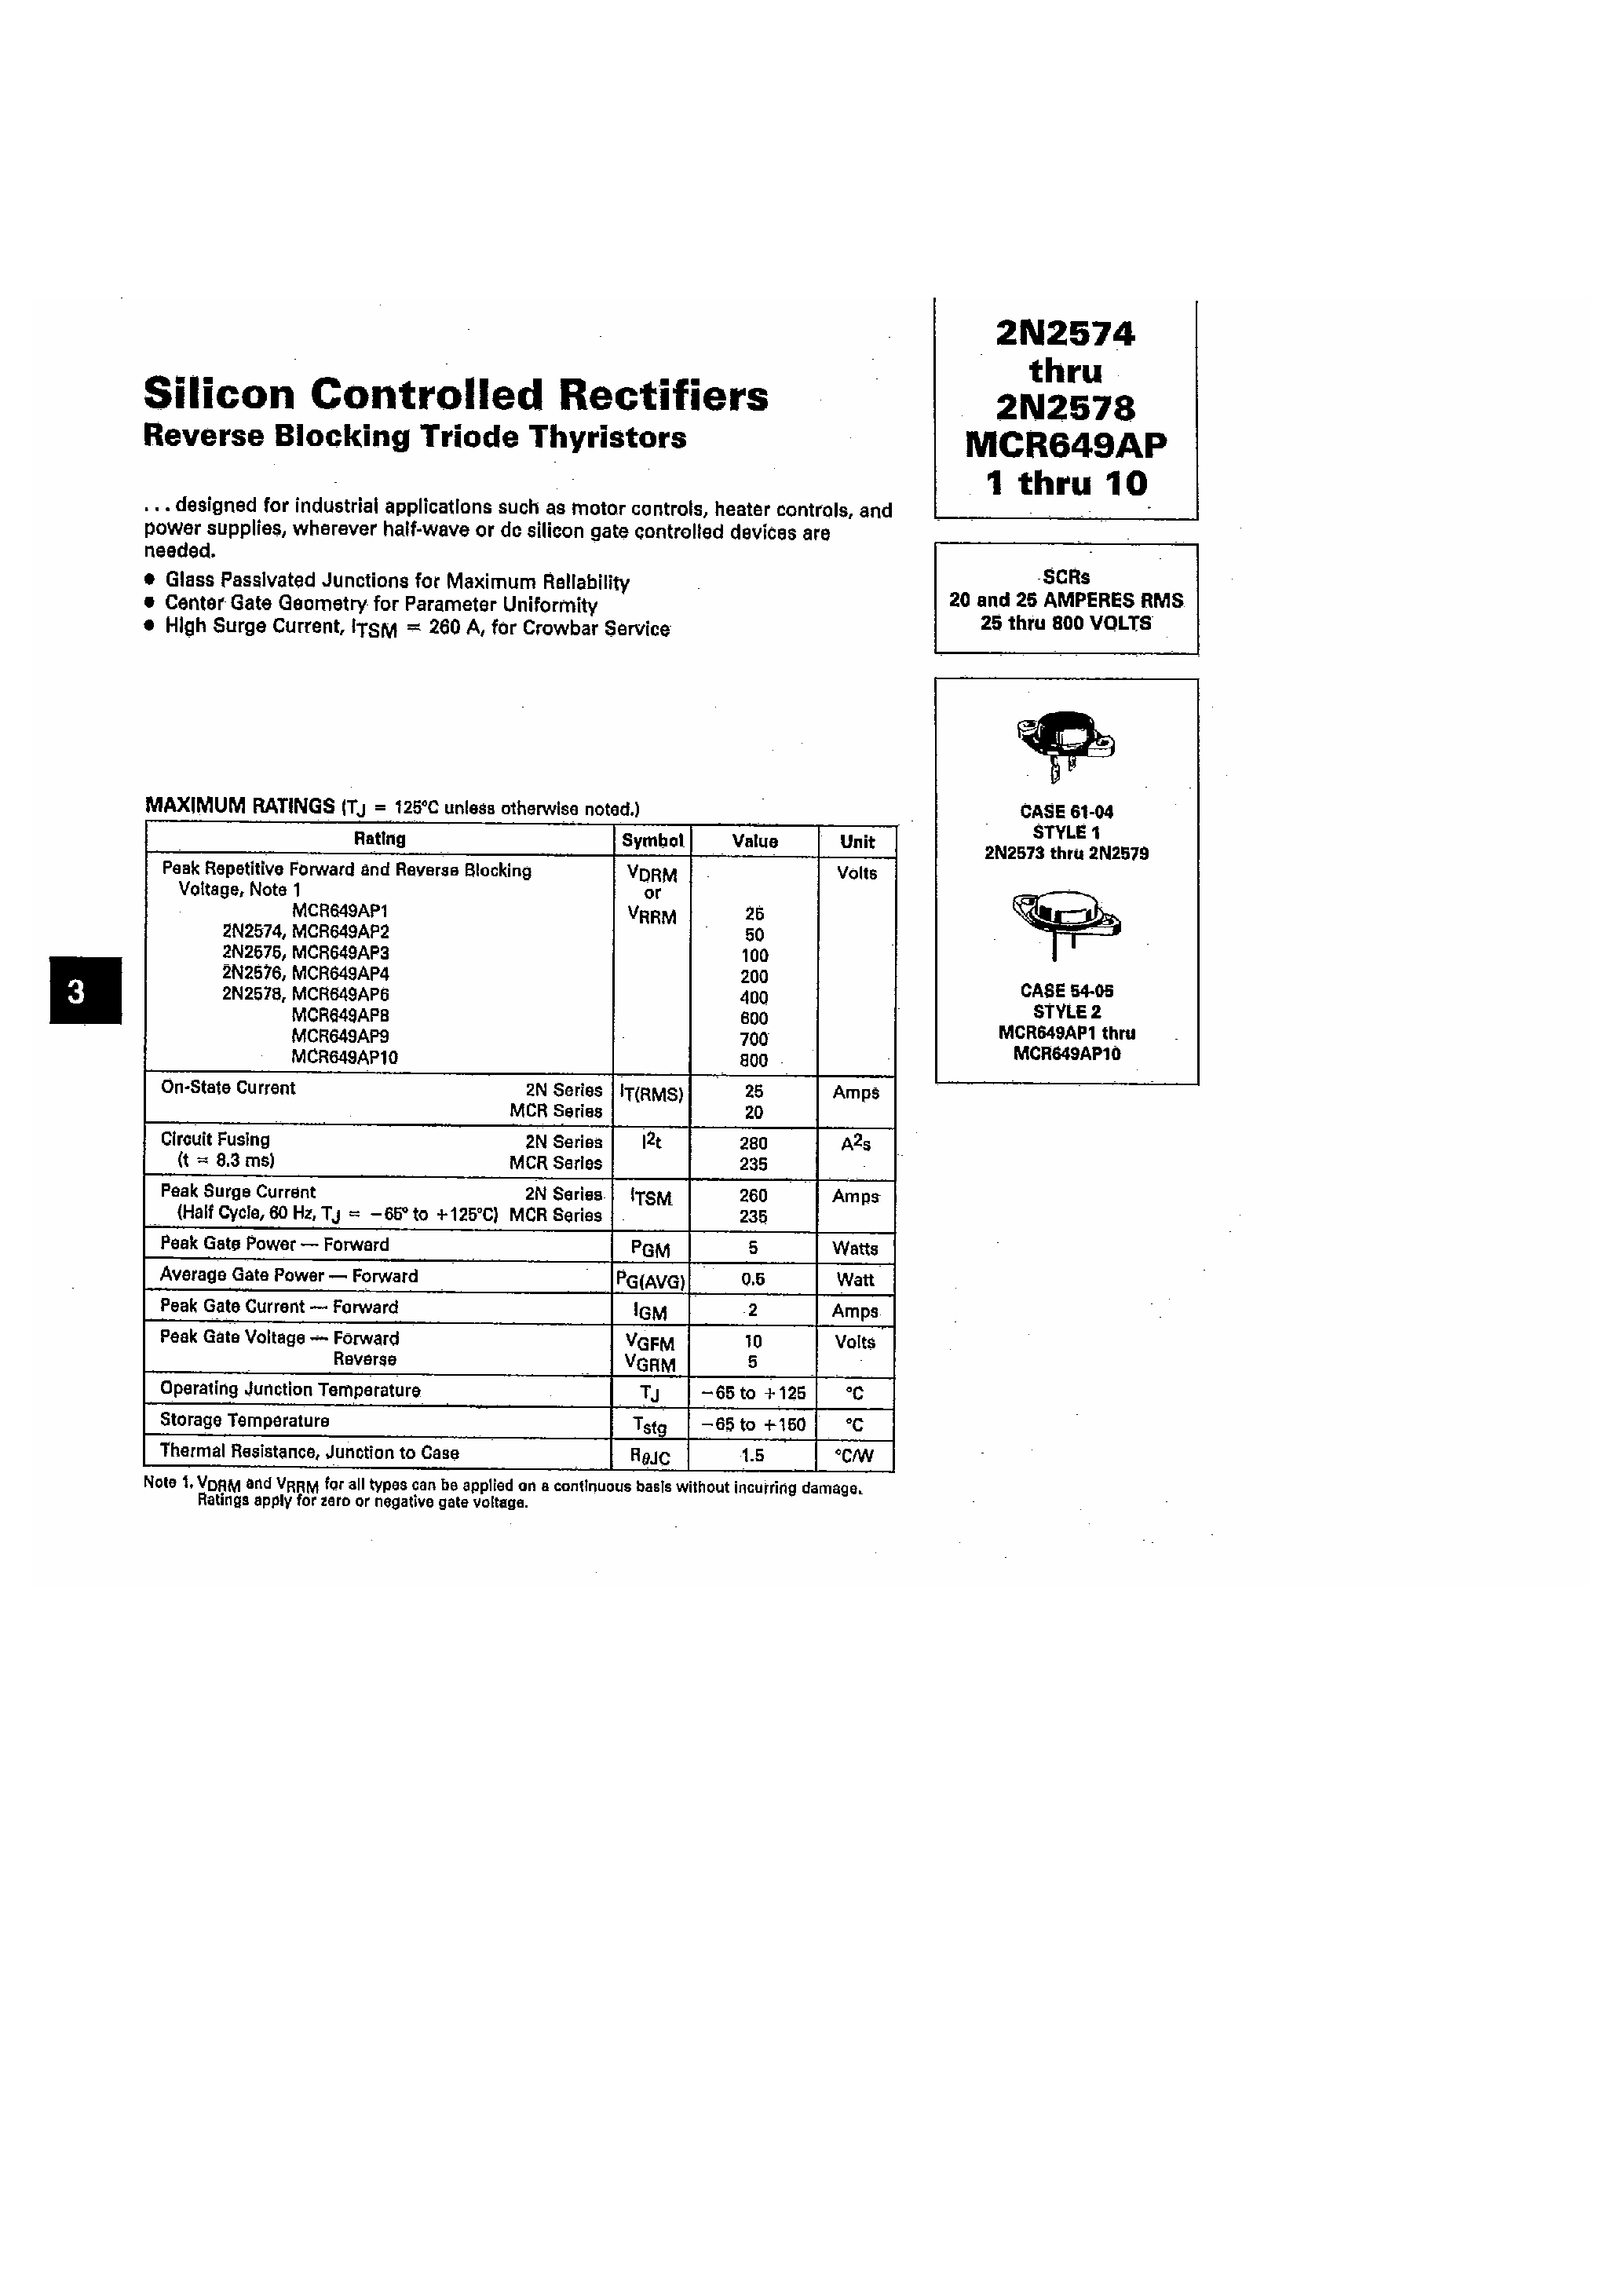 Datasheet 2N2574 - 2N2574 ~ 2N2578 / SILICON CONTROLLED RECTIFIERS page 1